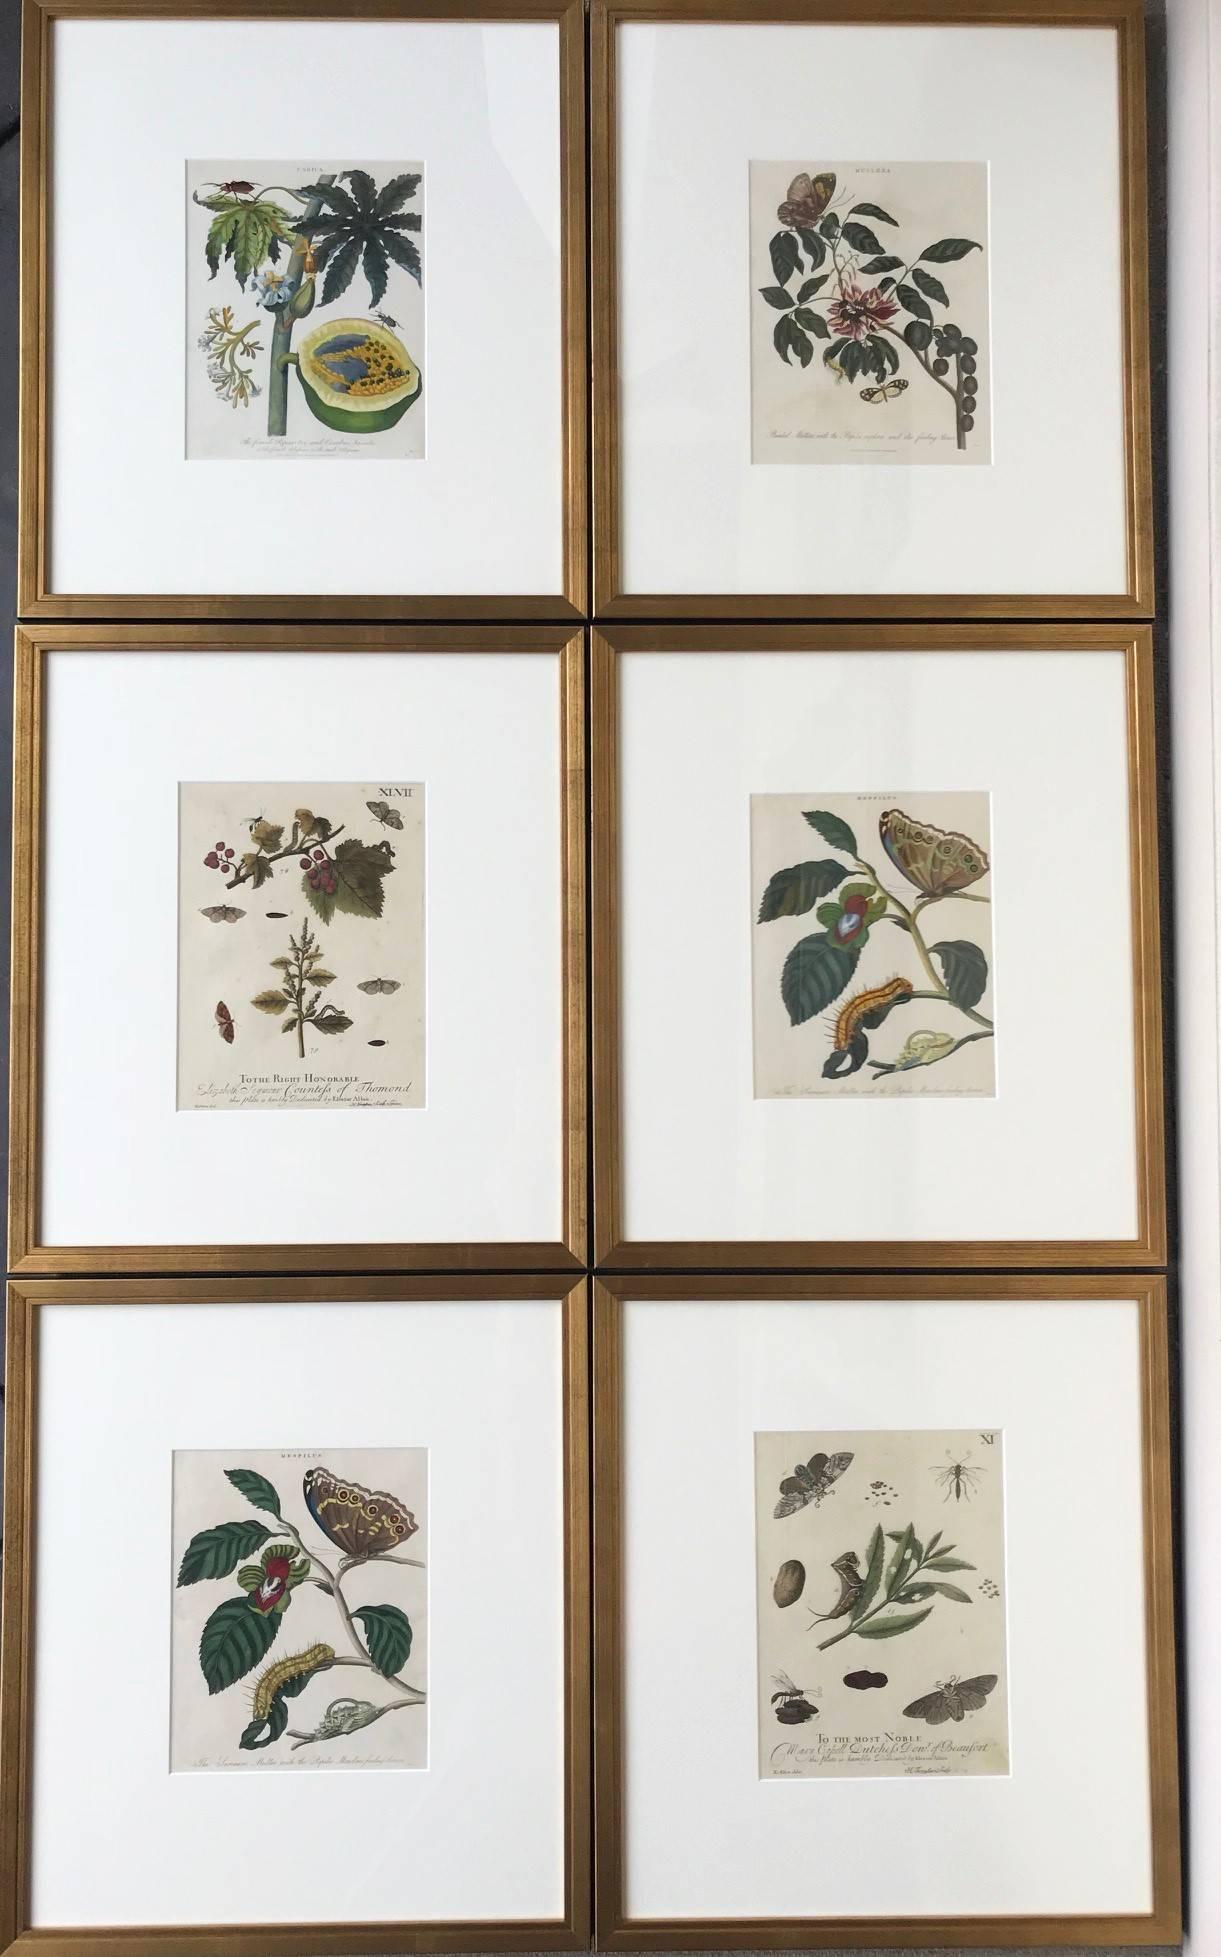 Unknown Still-Life Print - "Plants and Butterflies"